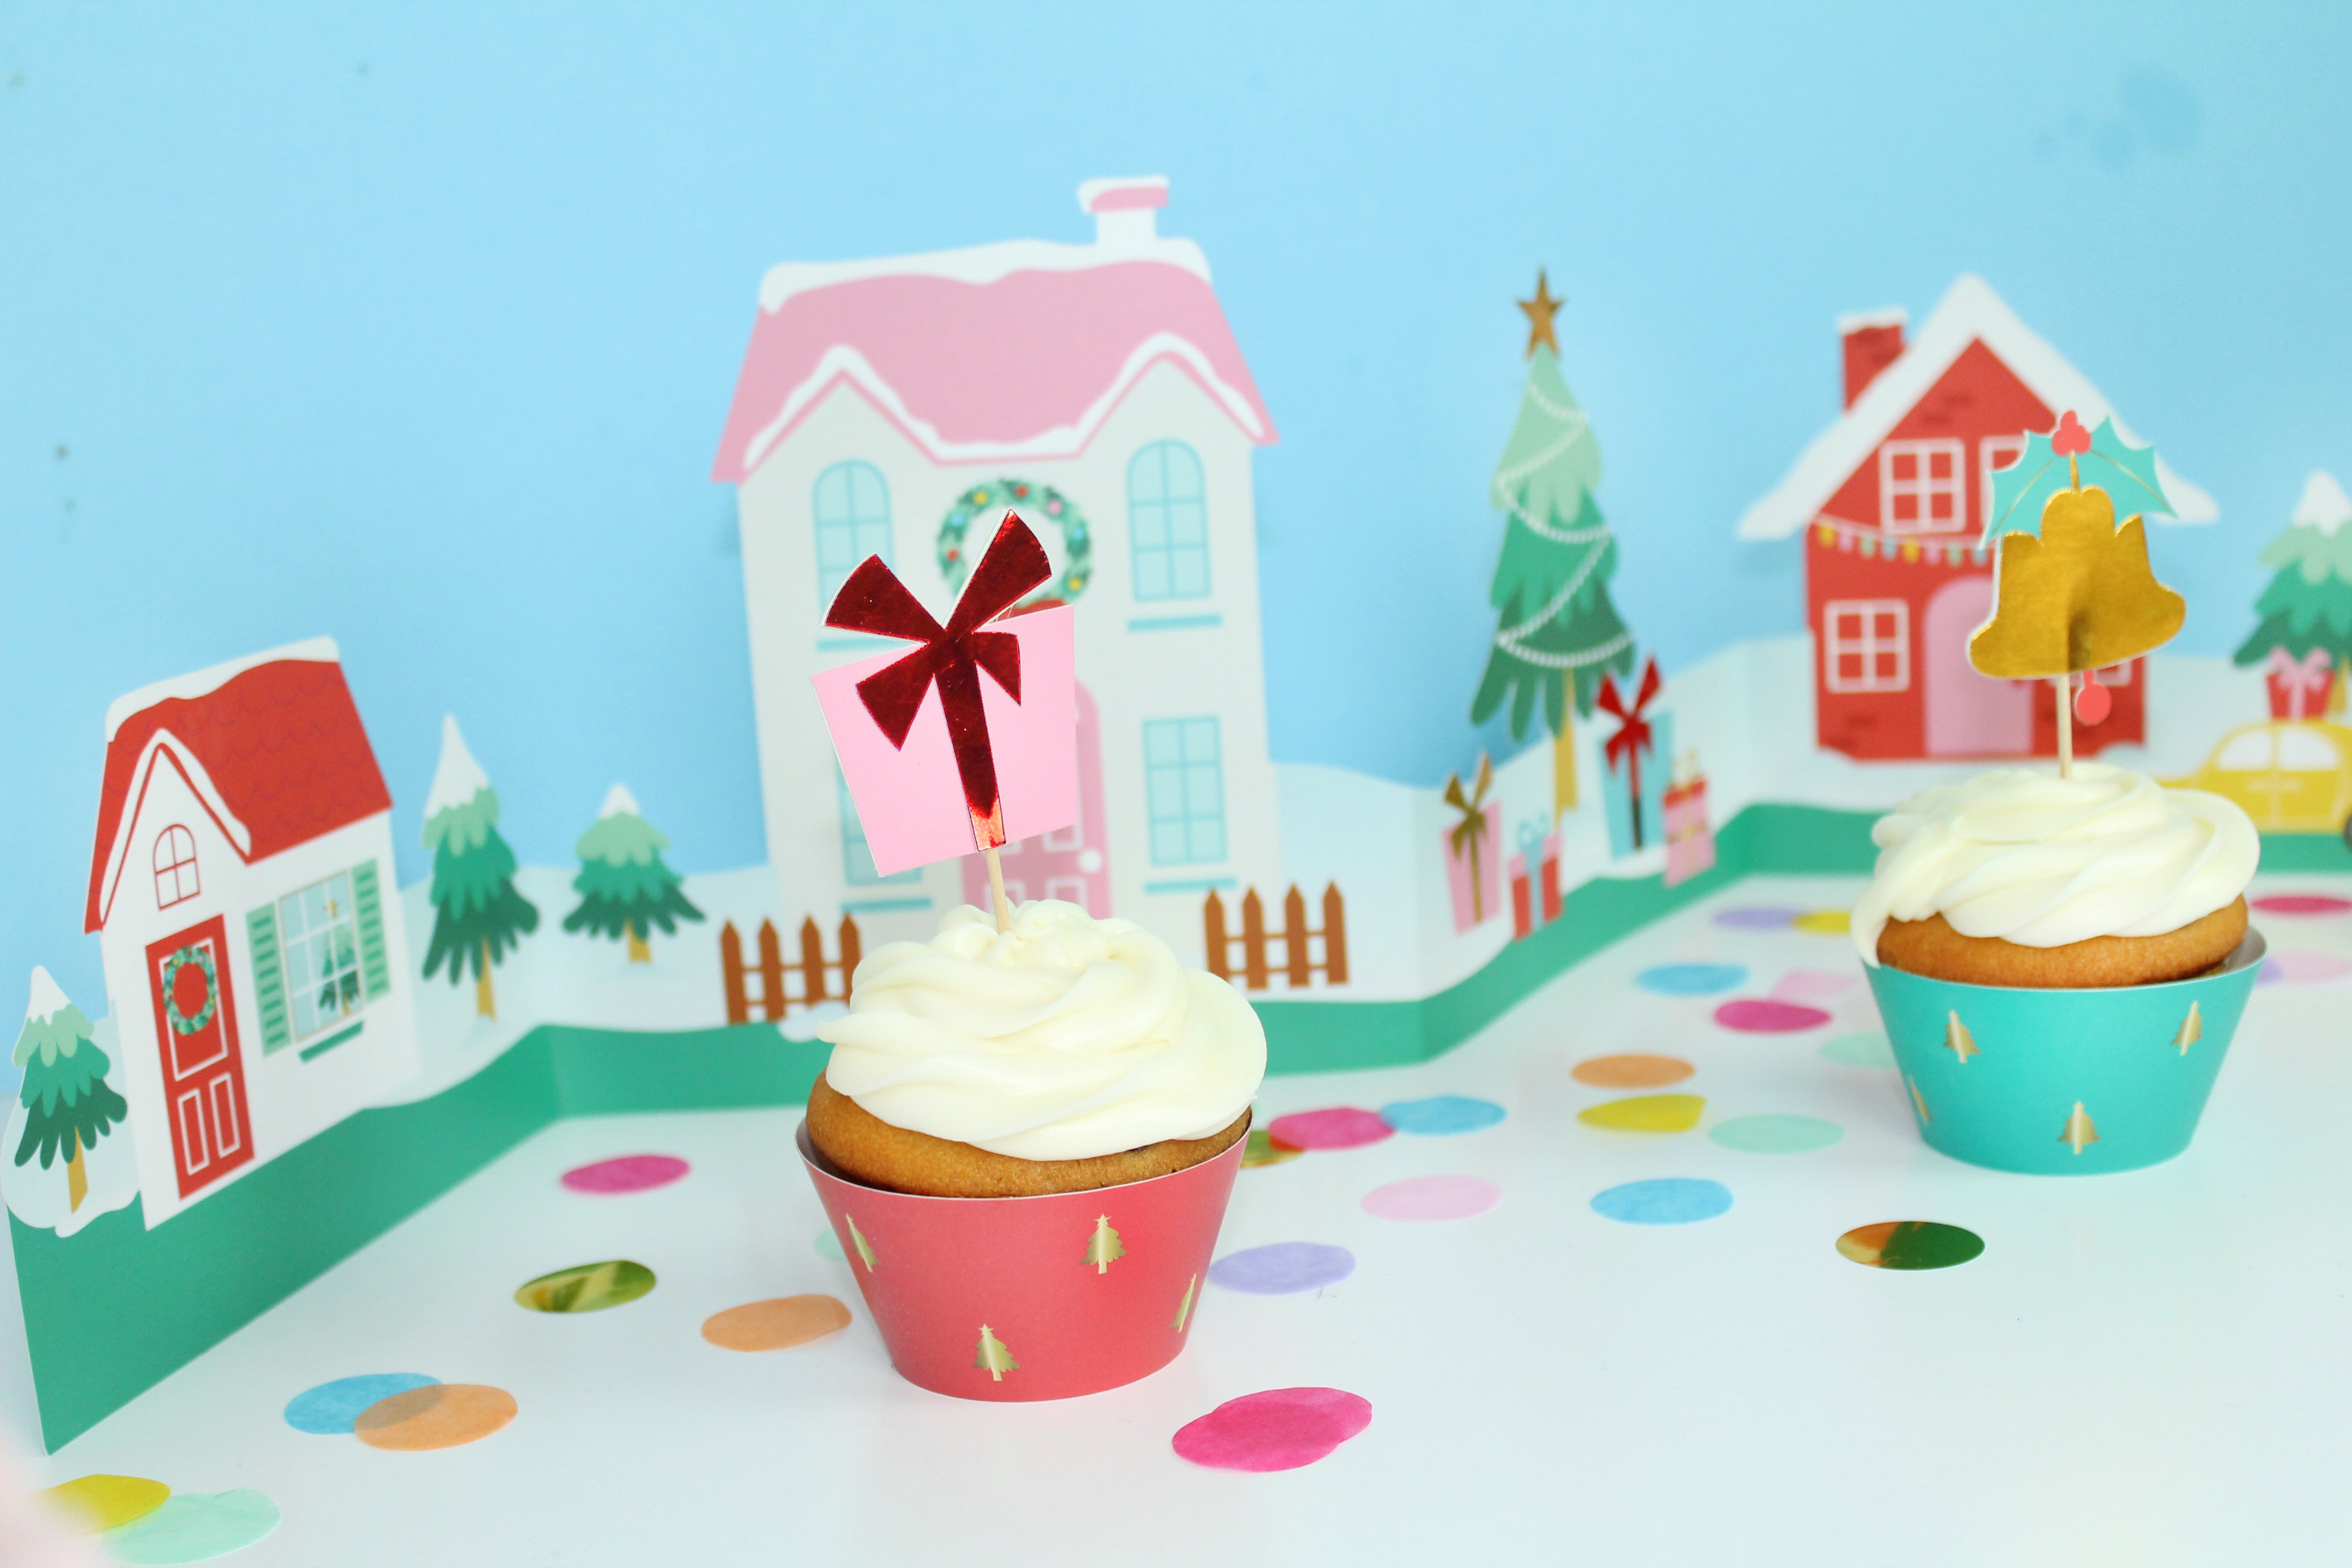 Holly Jolly Christmas - Cupcake Toppers & Wrappers , 12 Ct